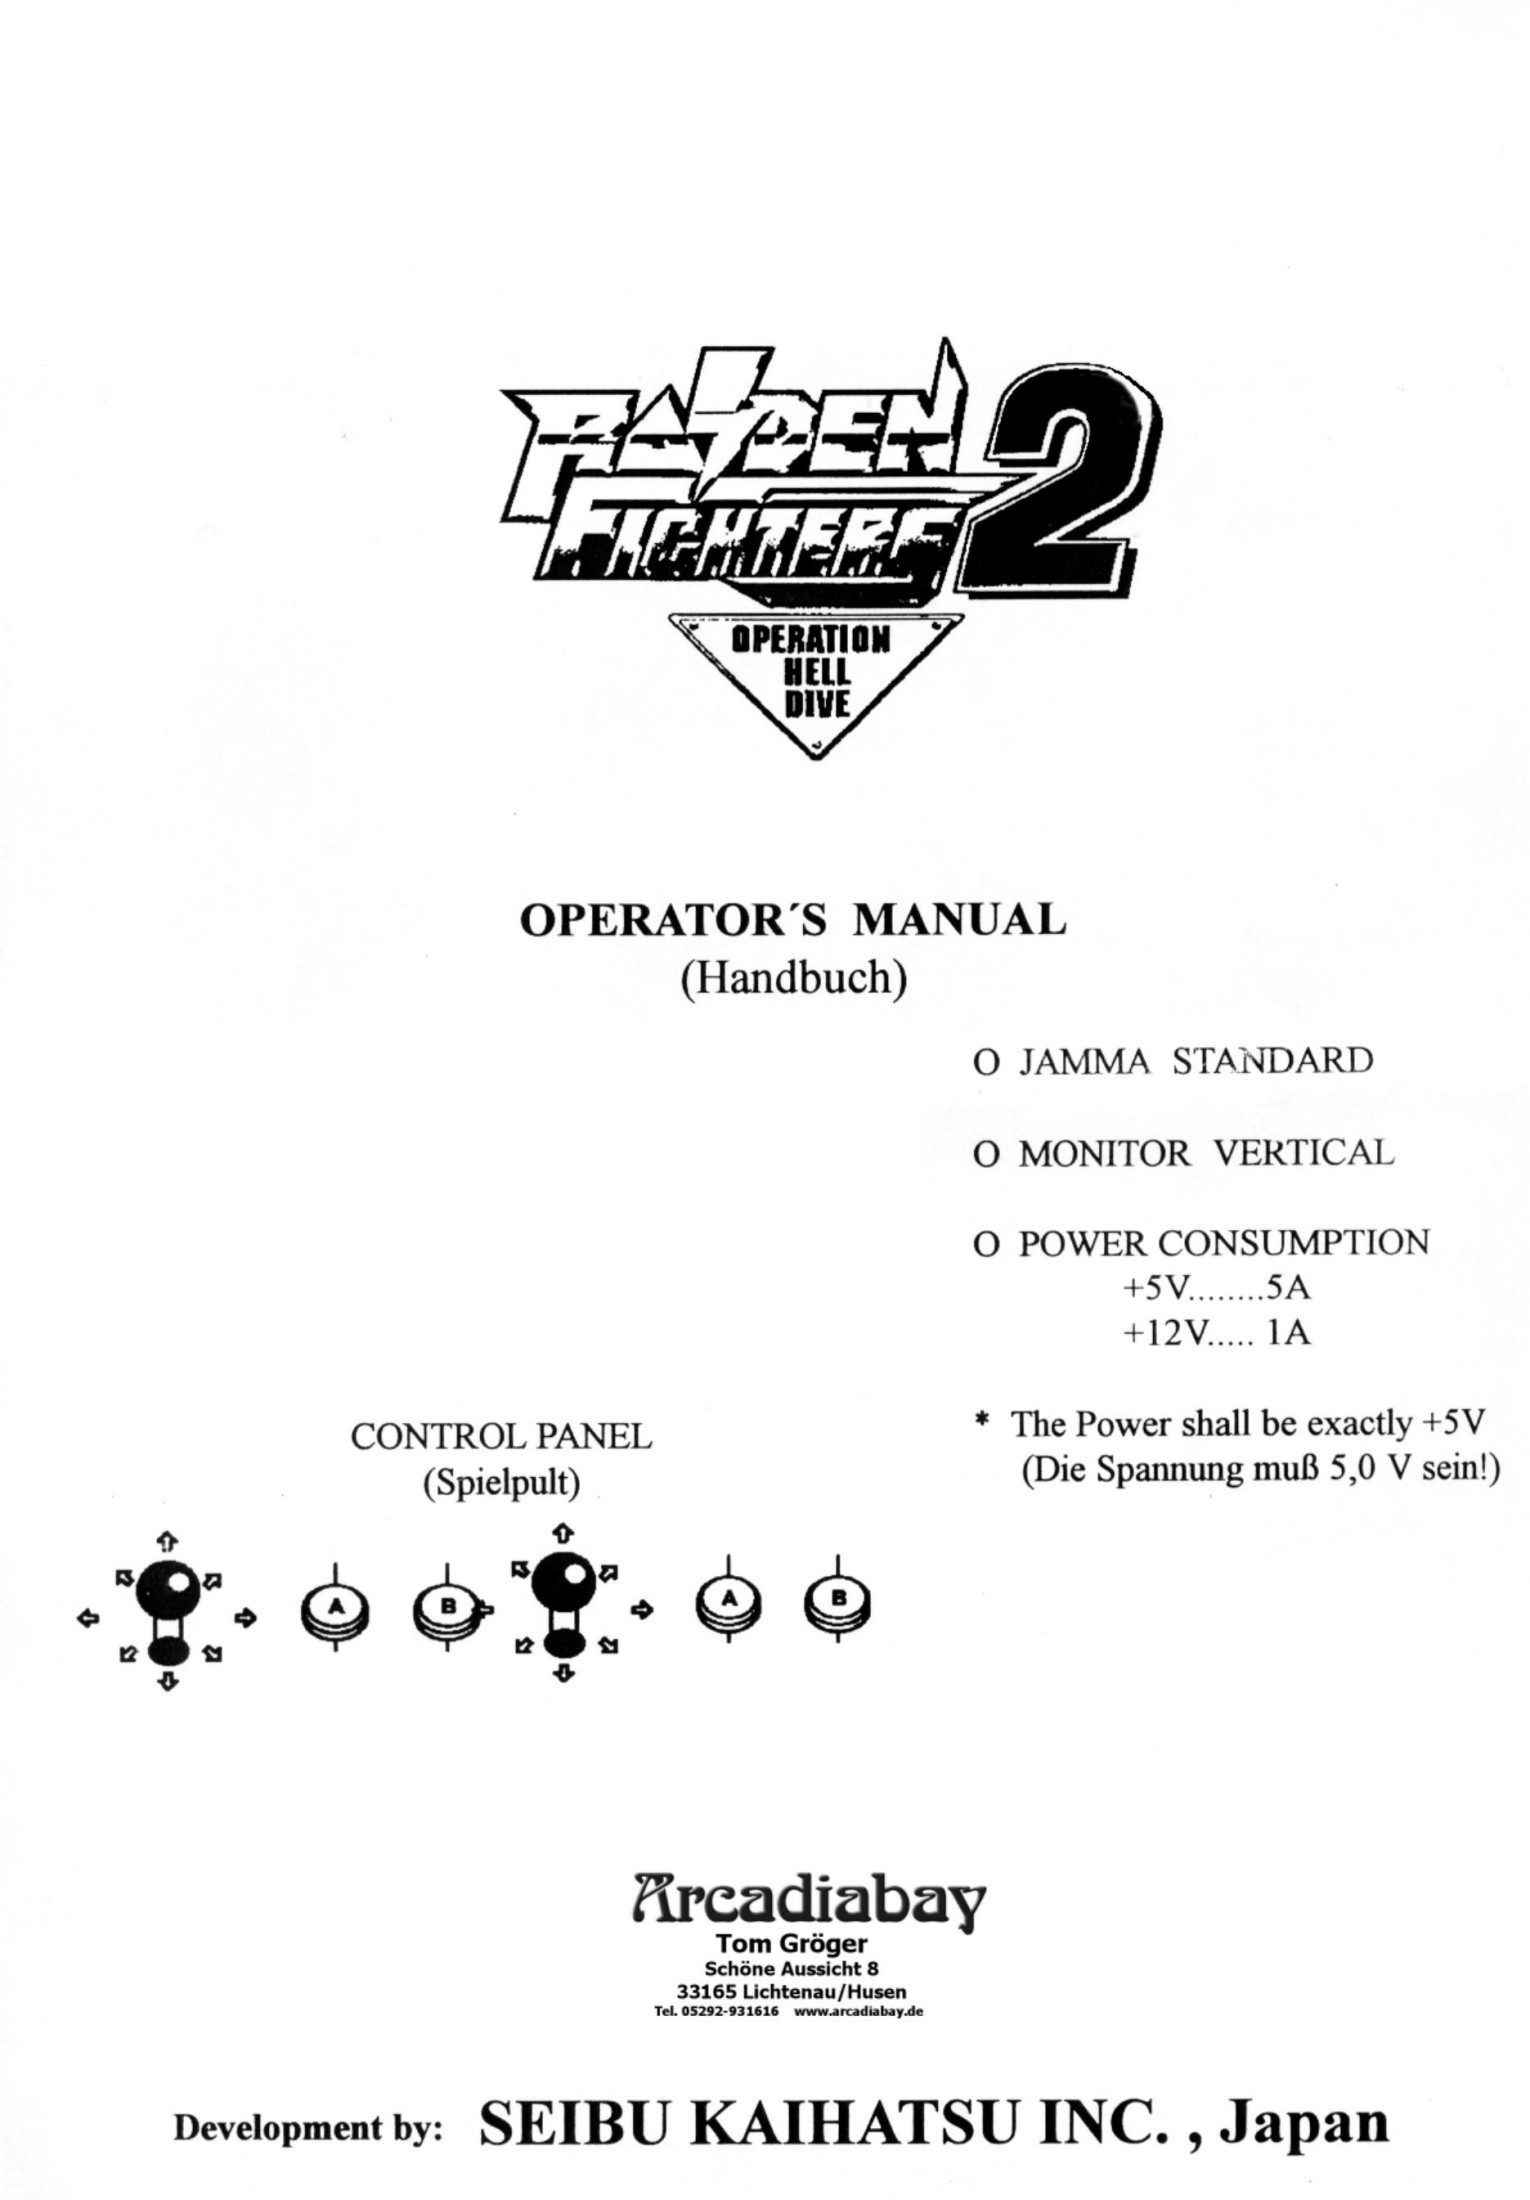 Raiden Fighters 2 "Operation Helldive"